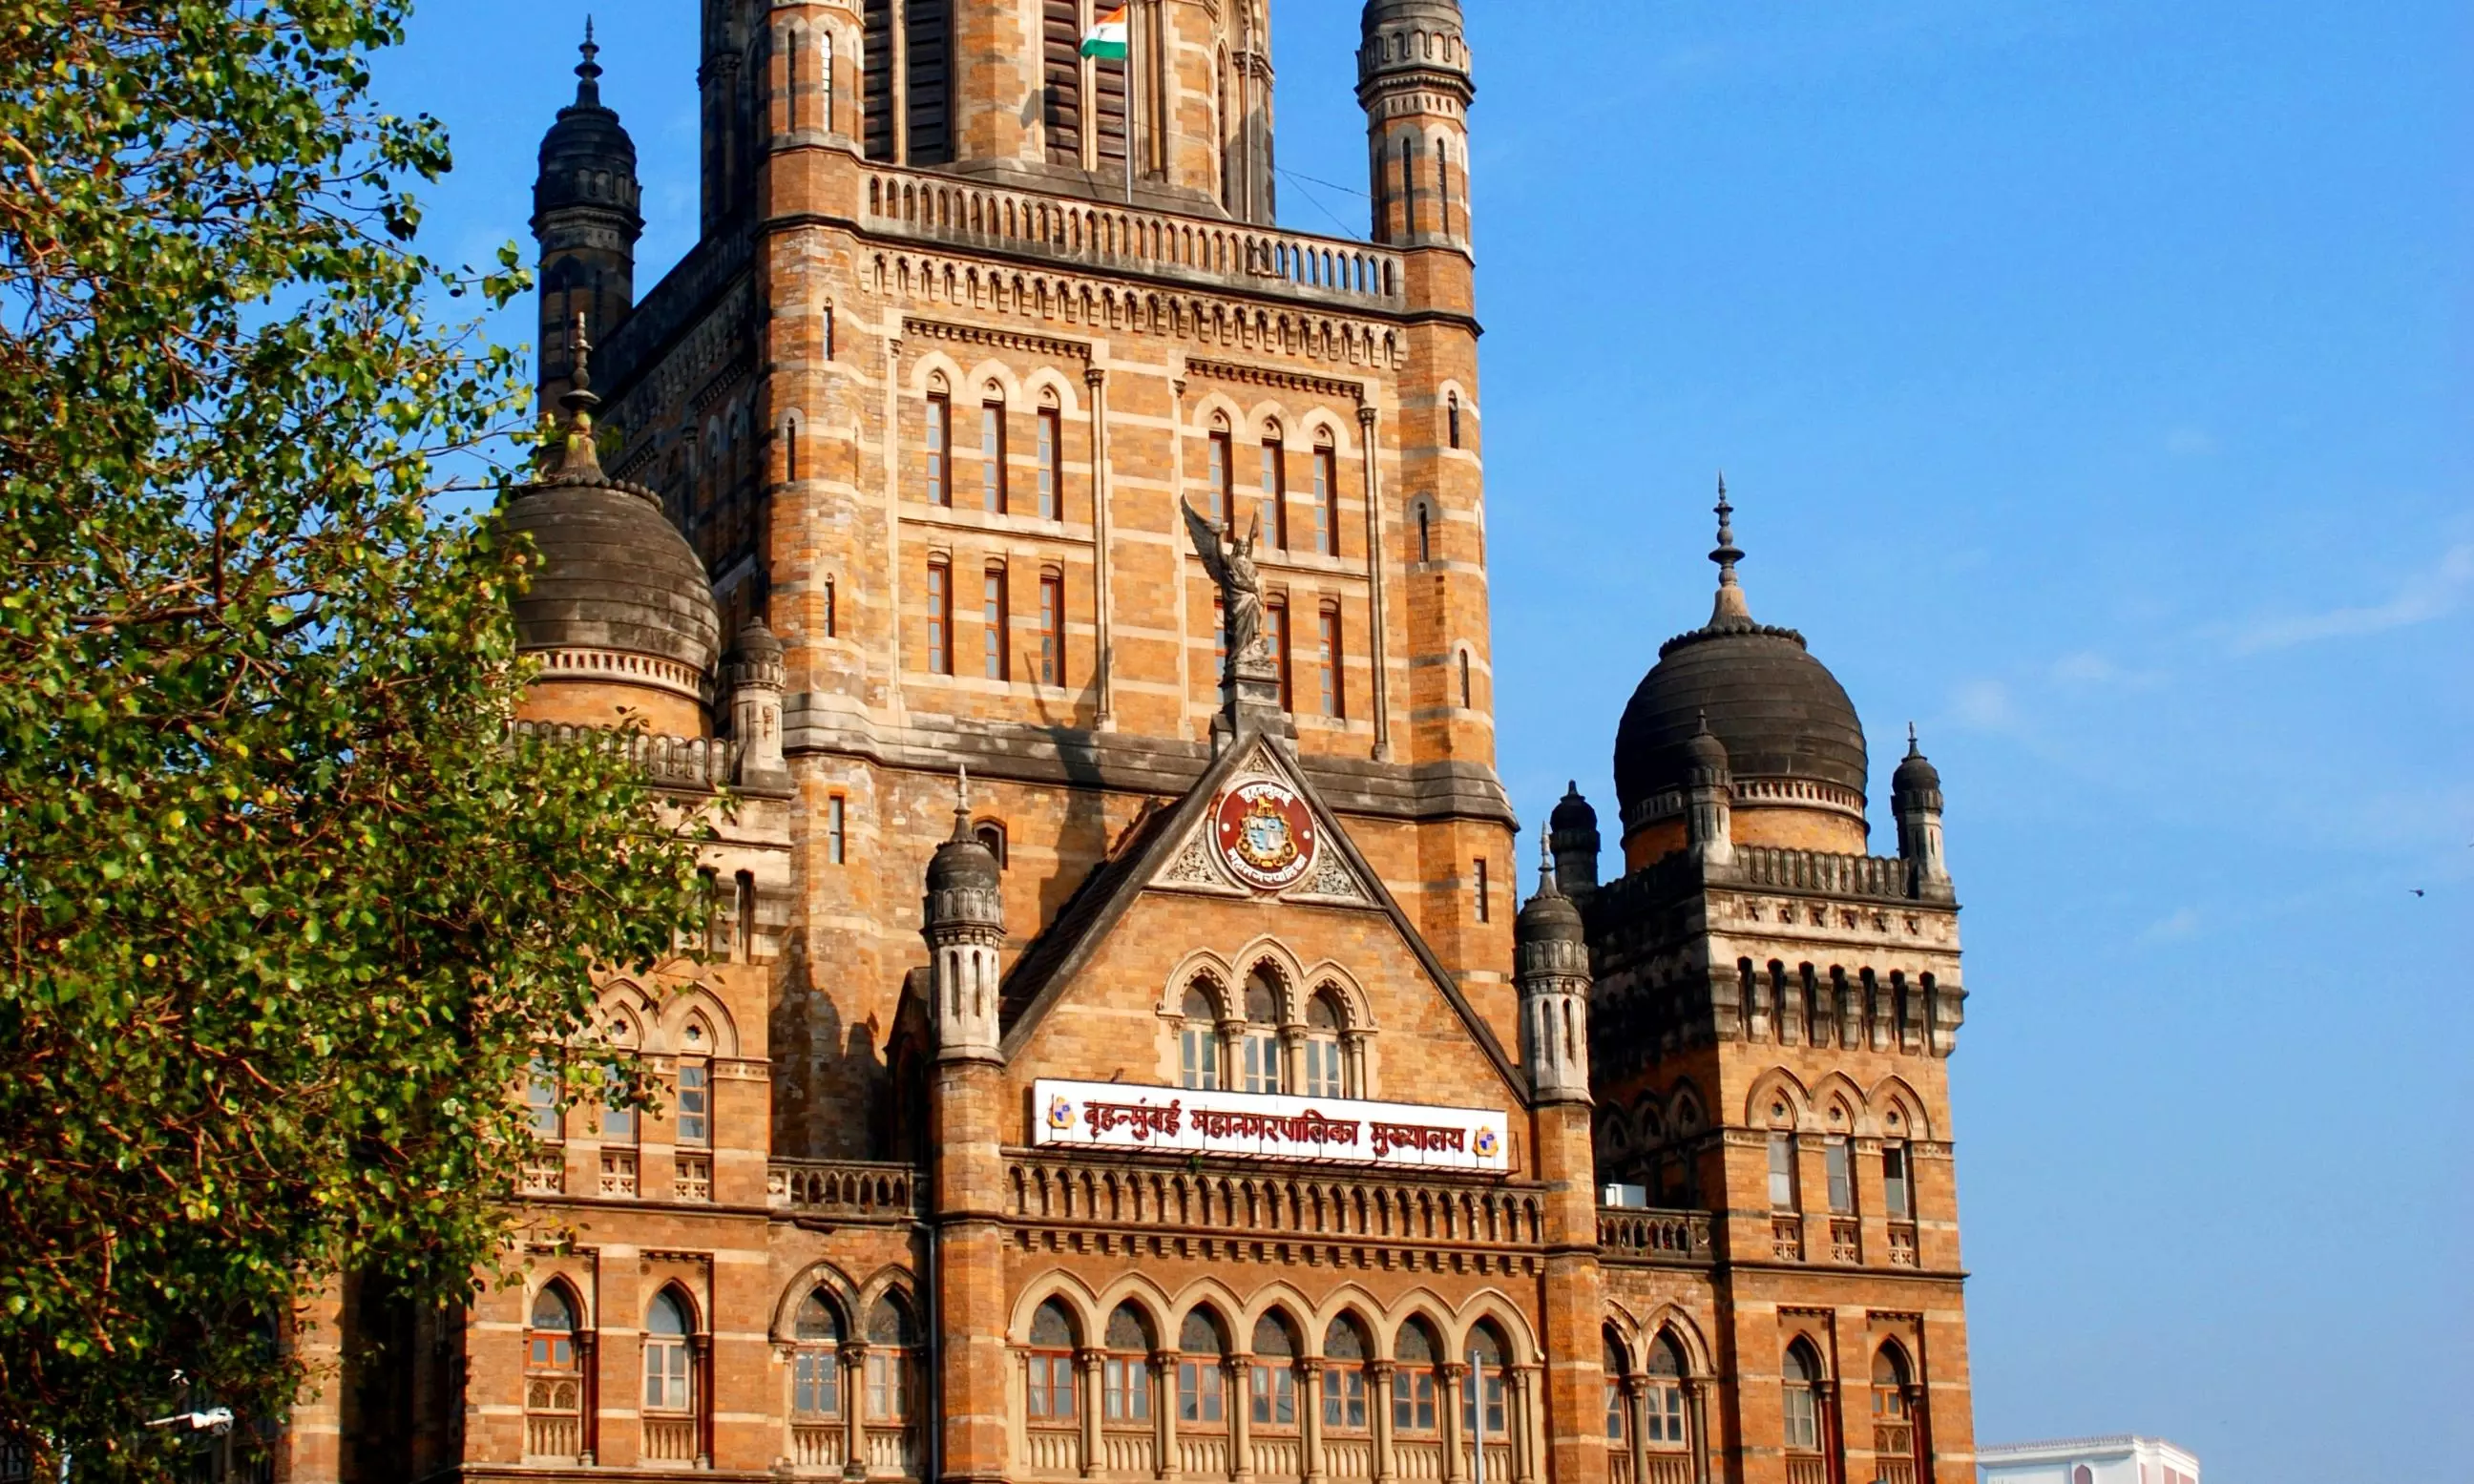 BMC unveils highest ever budget at Rs 59,954 crore focusing on health, infra, women safety